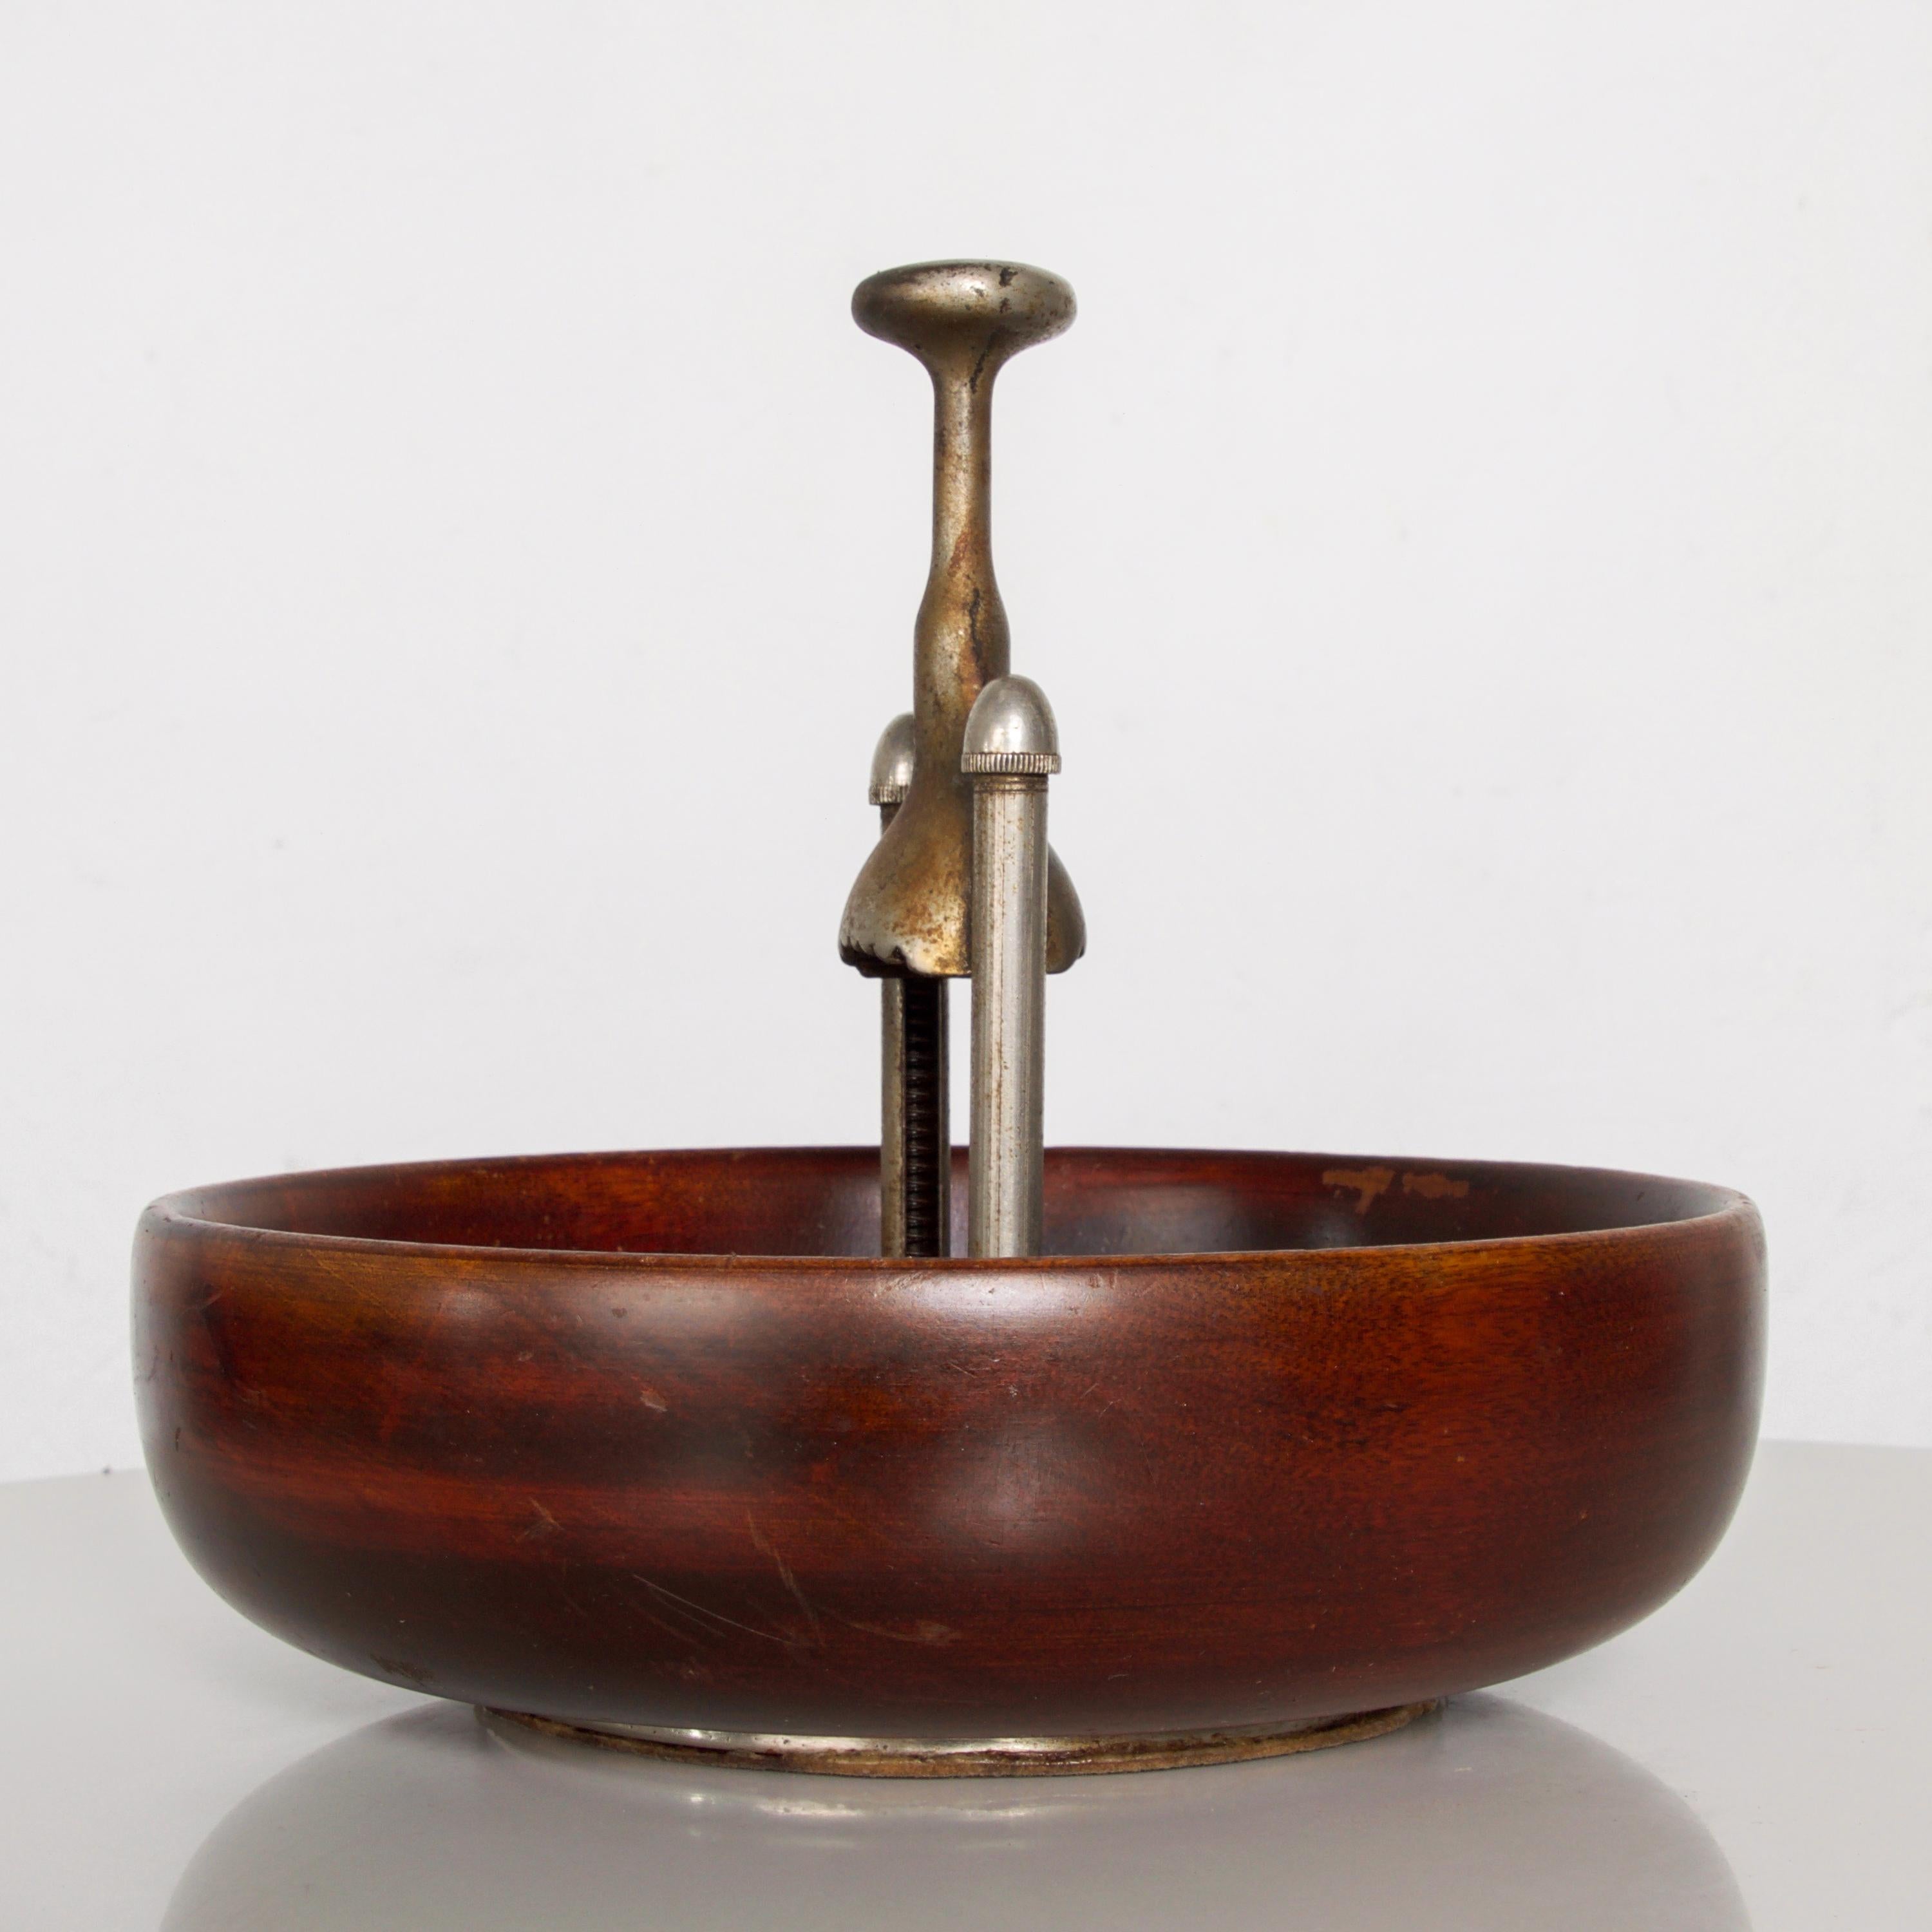 1960s modernist designed elegant cherrywood nut bowl with built in attached nutcracker
fabulous modern purposeful midcentury design. Inscription reads PATENT APPLIED FOR
Measures: 7 1/2